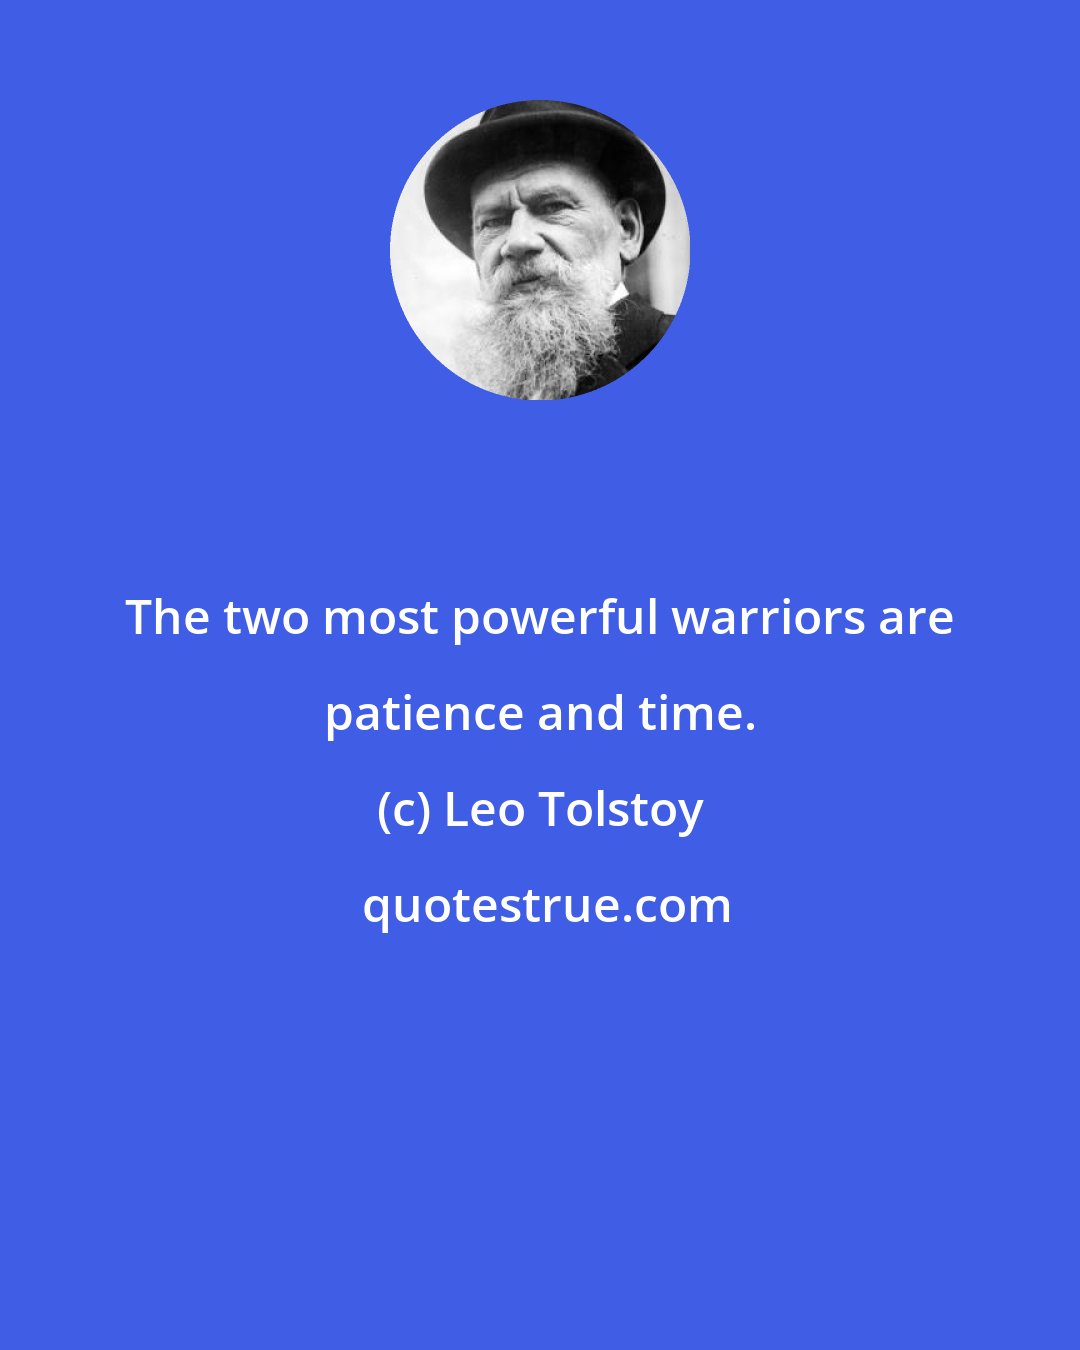 Leo Tolstoy: The two most powerful warriors are patience and time.